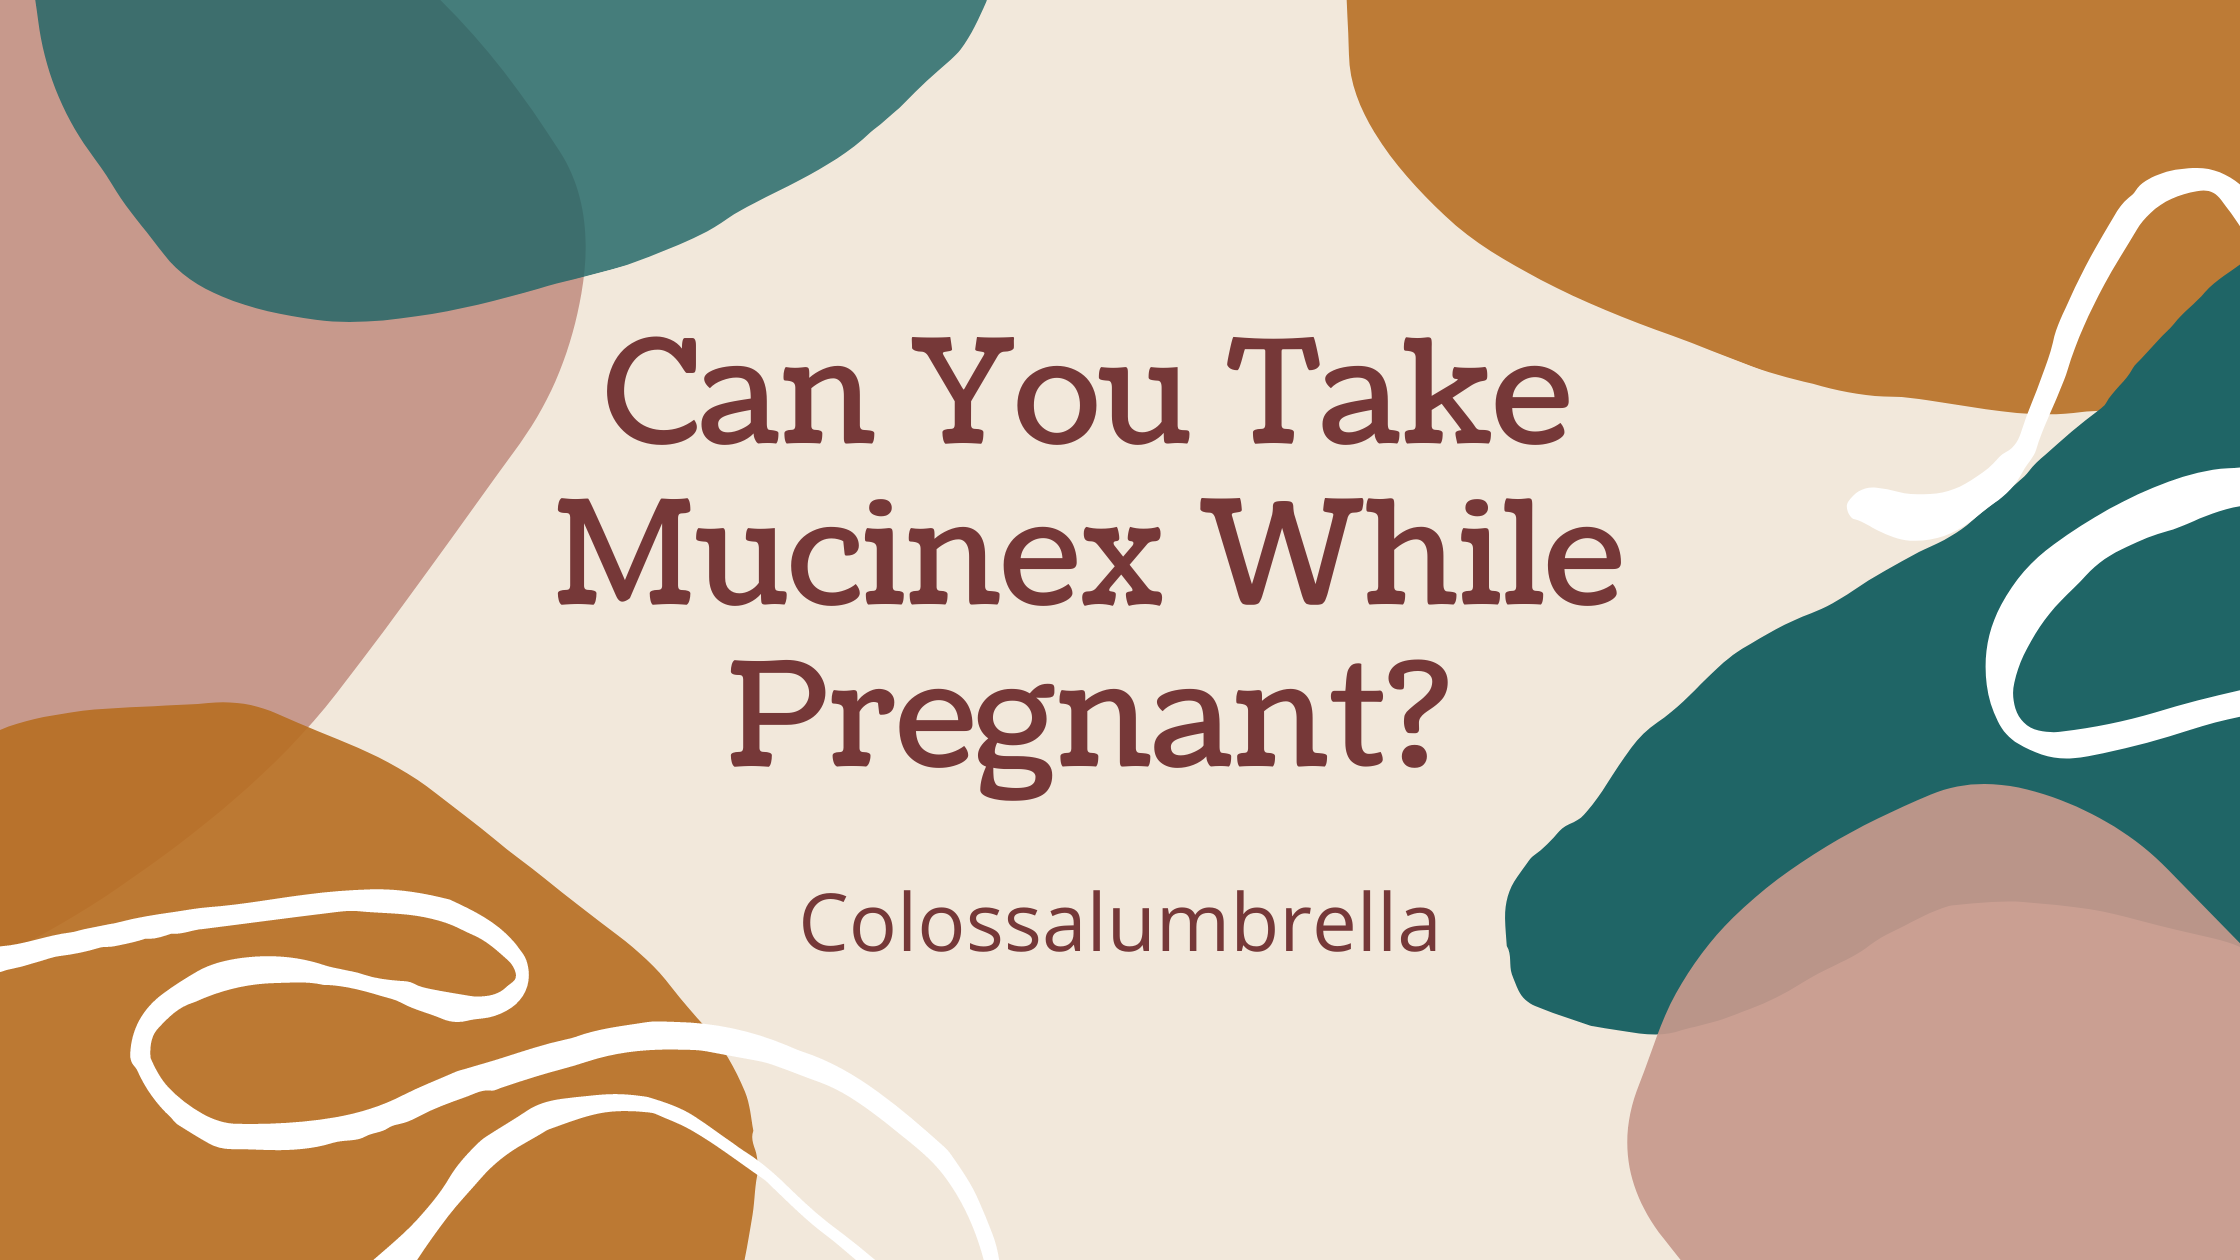 Can You Take Mucinex While Pregnant?